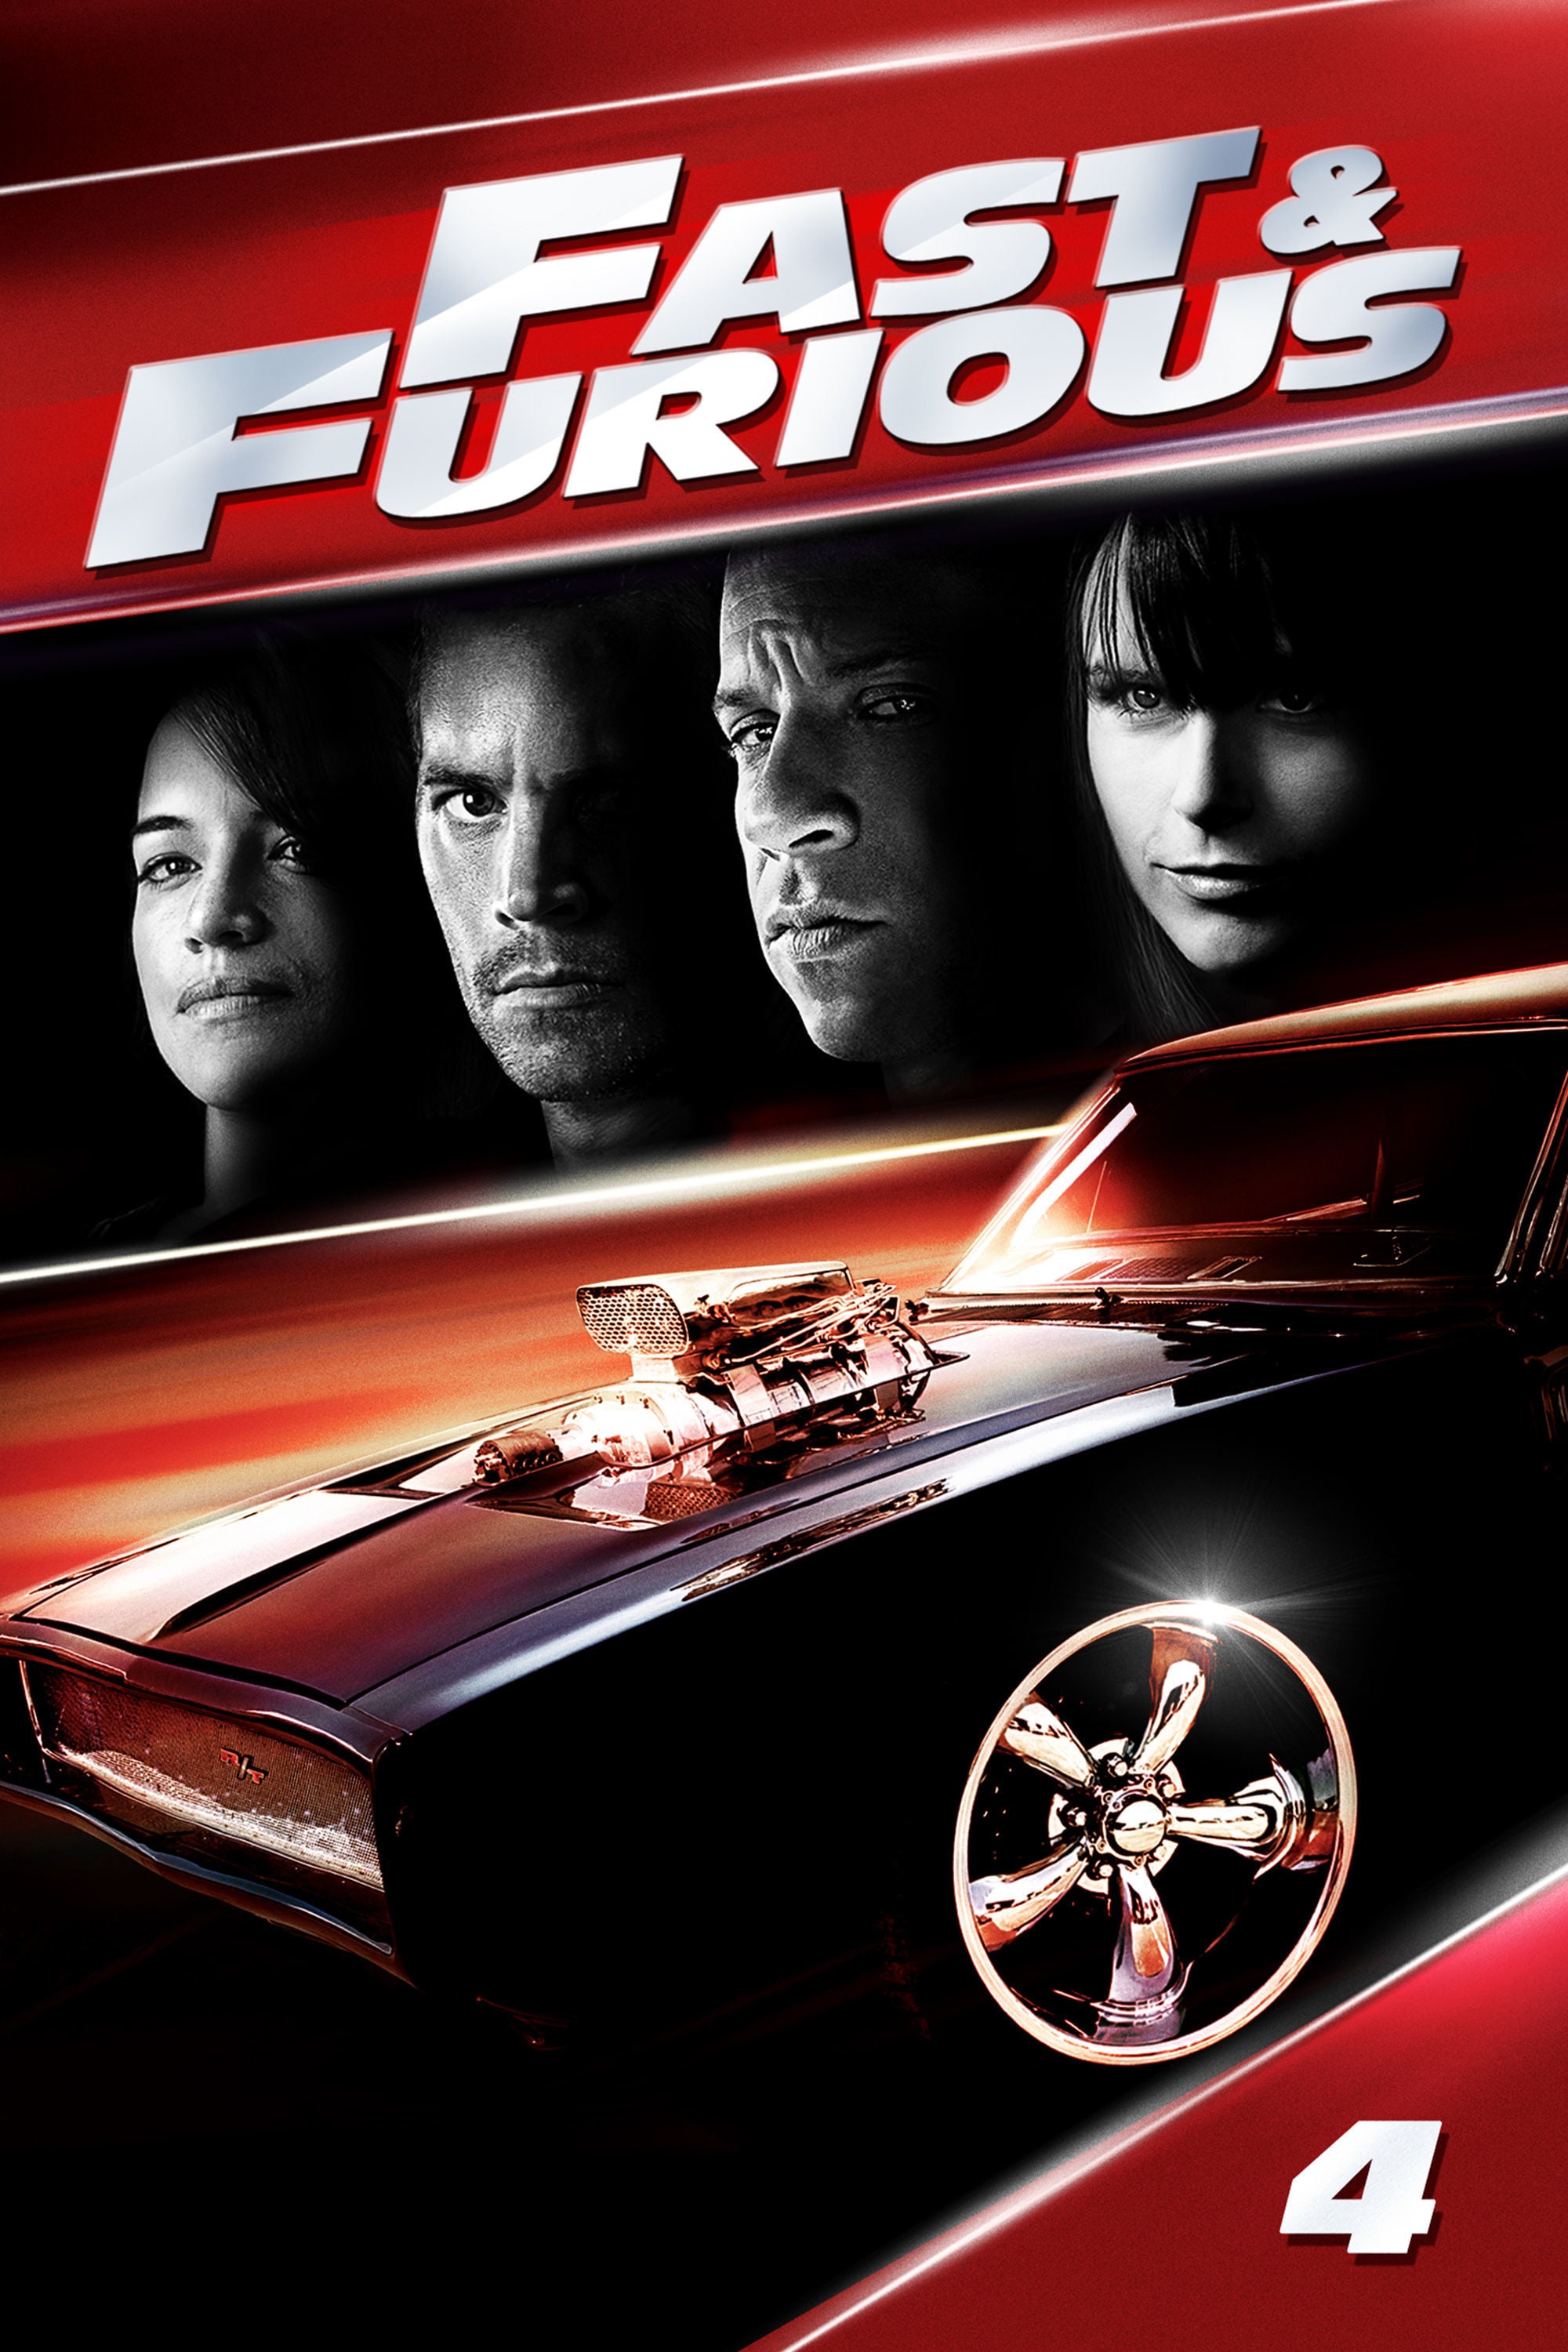 Fast And Furious Film The Fast And The Furious Wiki Fandom Powered By Wikia